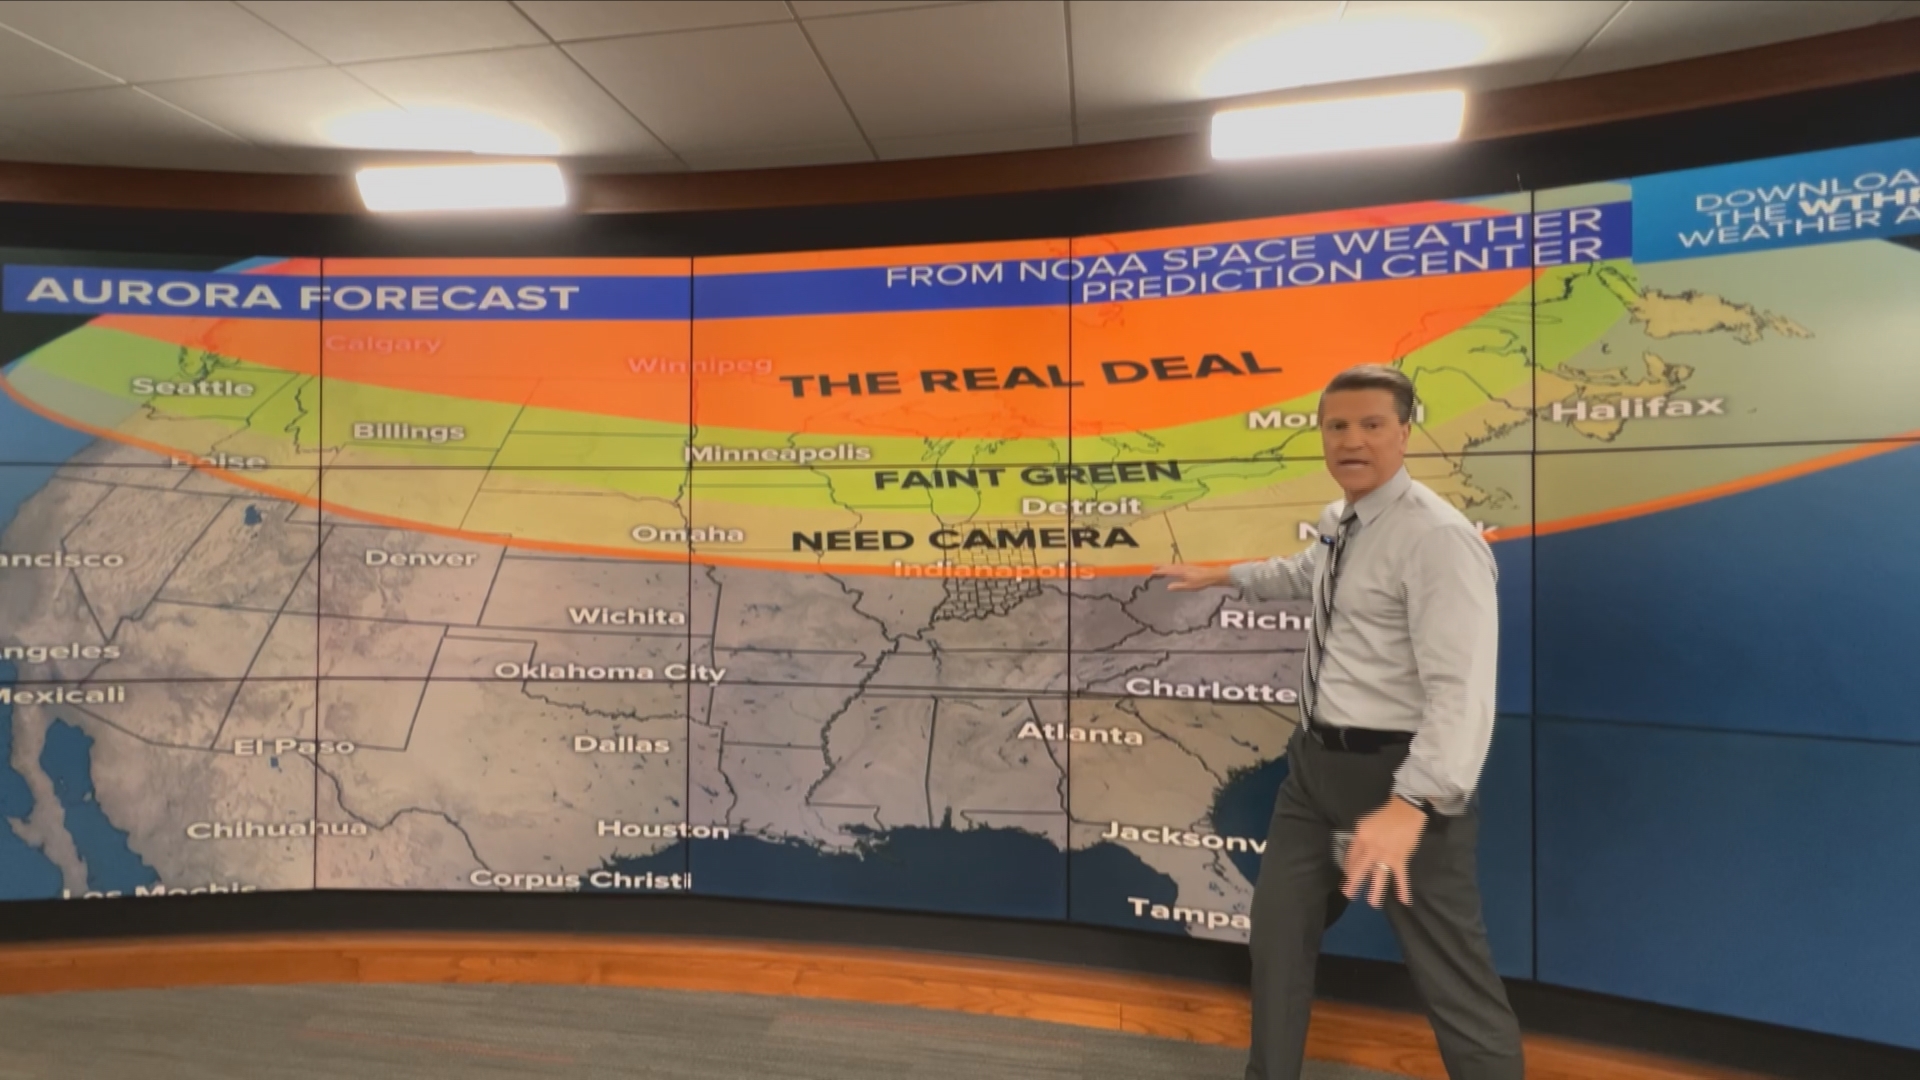 You have a slight chance of seeing the aurora borealis in Indiana tonight. Sean Ash breaks down the science that makes it possible, and the forecast.